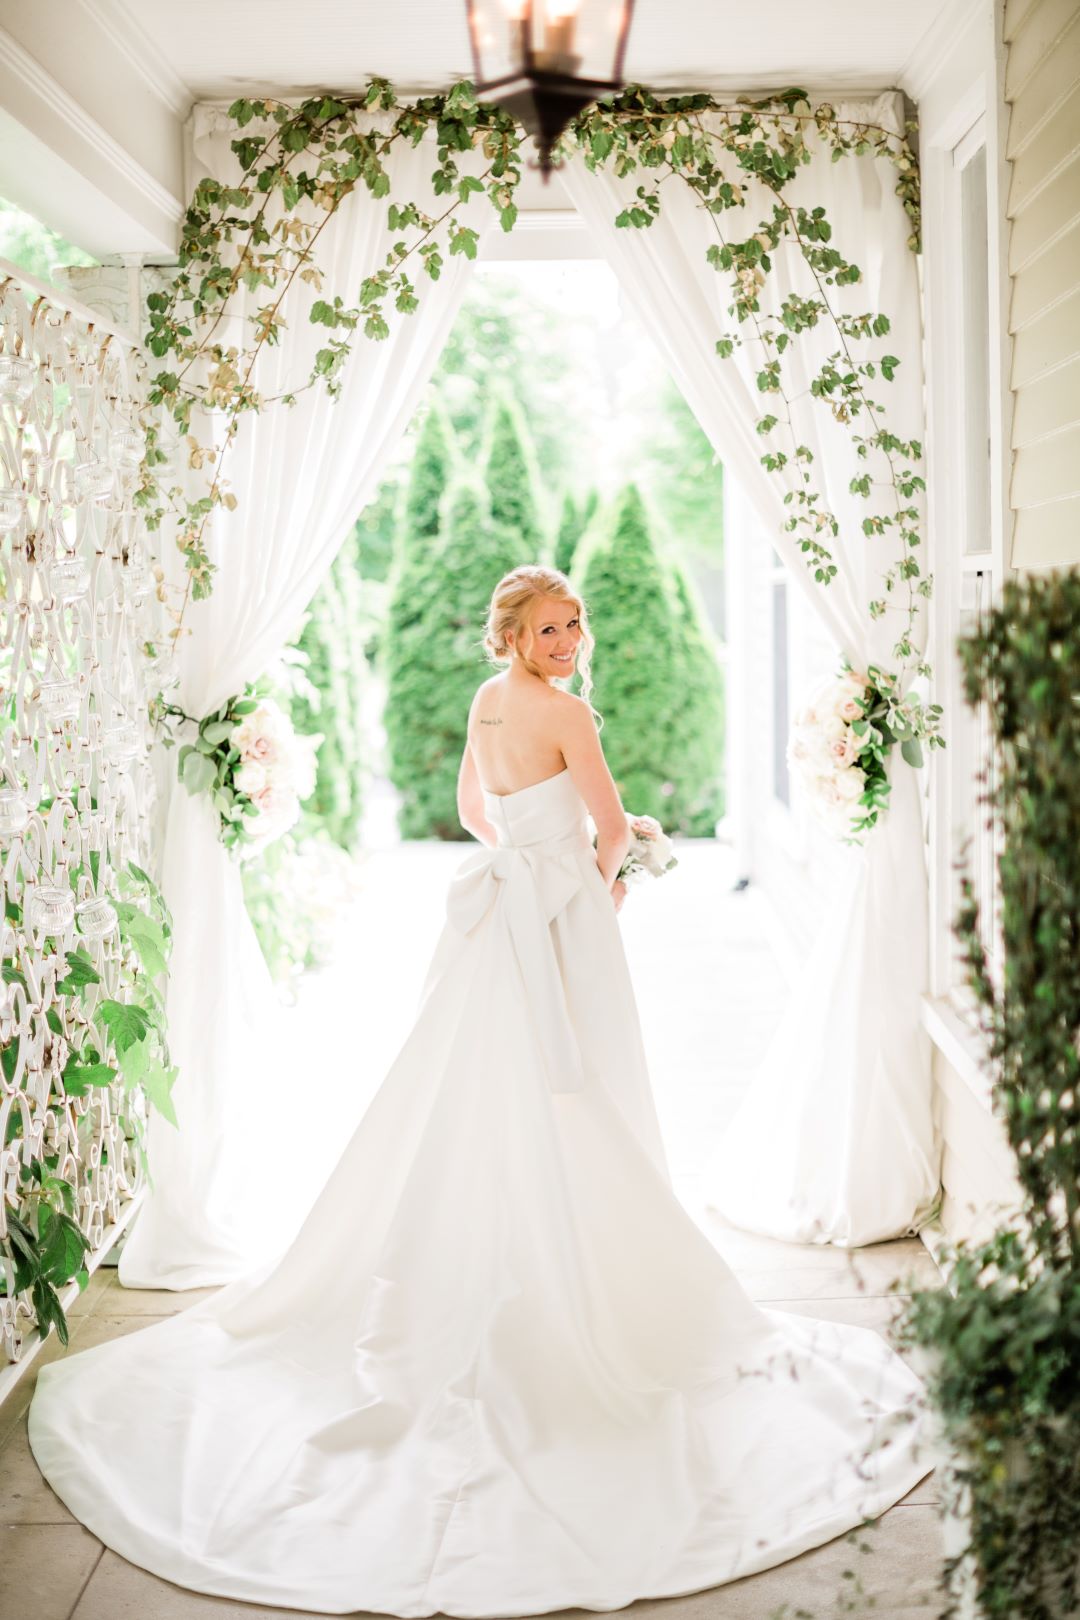 CJ's Off The Square | Bride posing in her wedding gown with a train under an arch of greenery